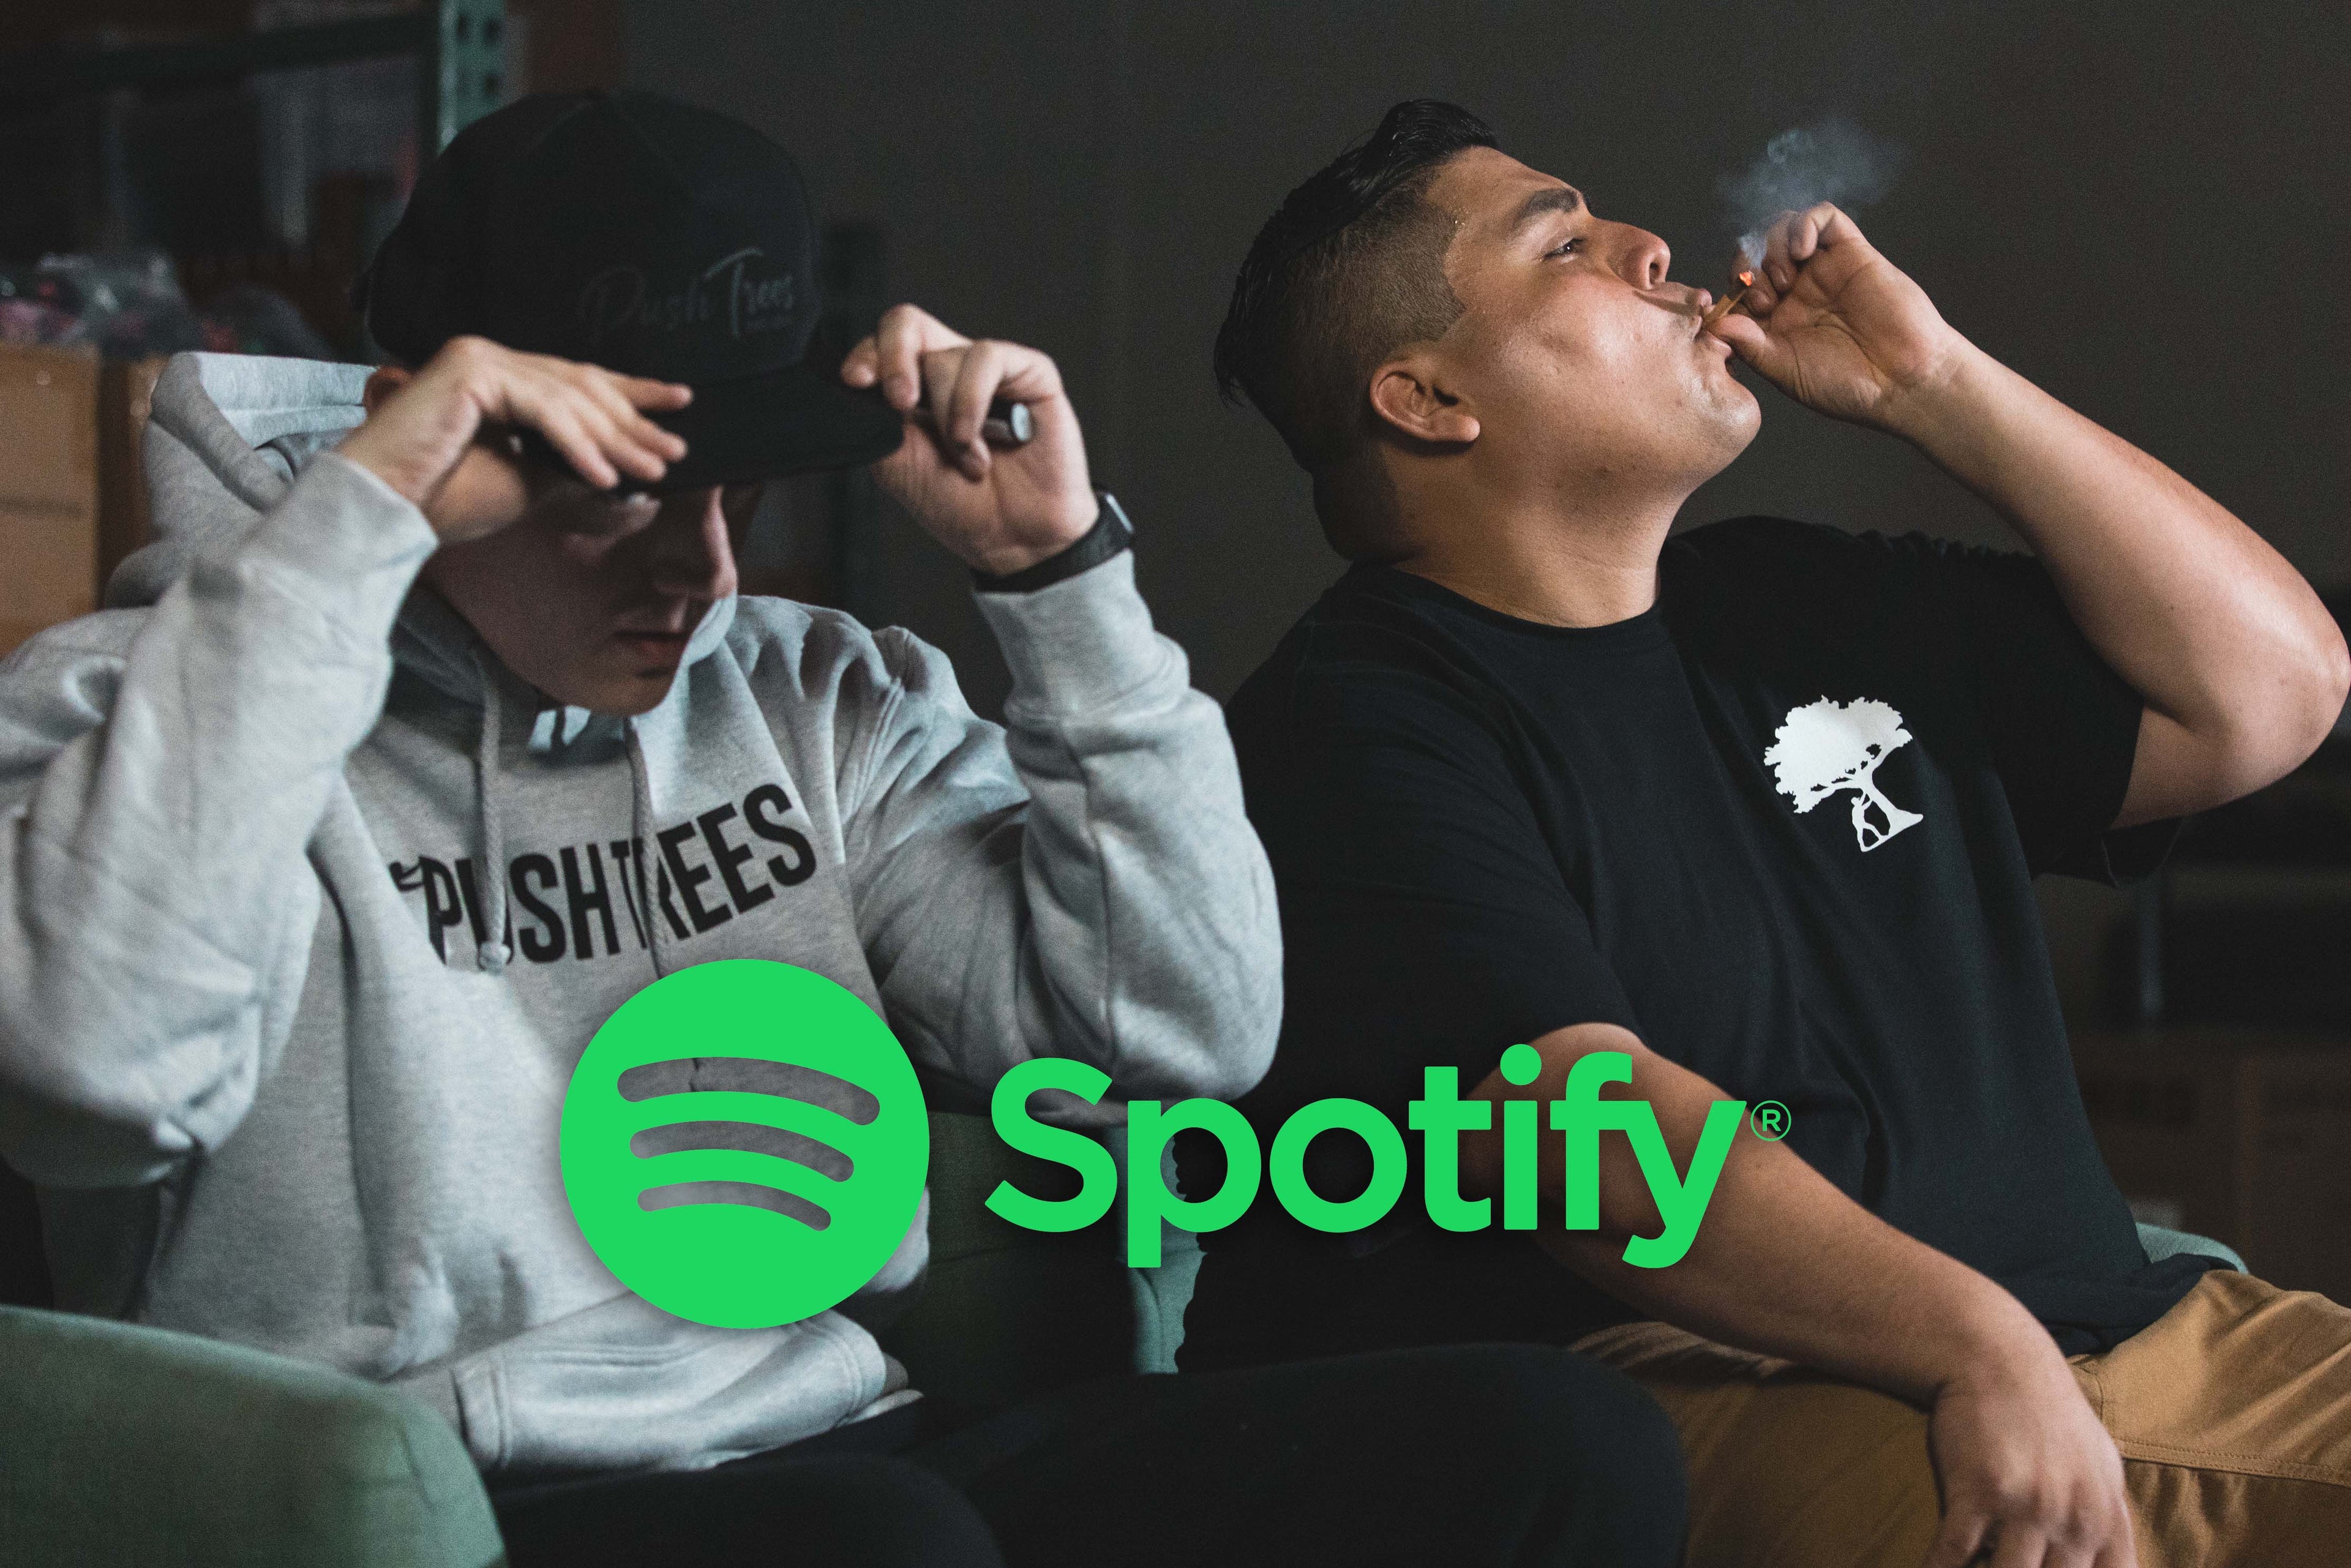 Spotify Elevates "DOPE AS USUAL" to Partner Podcast Status: A Milestone for Authentic Content Creation